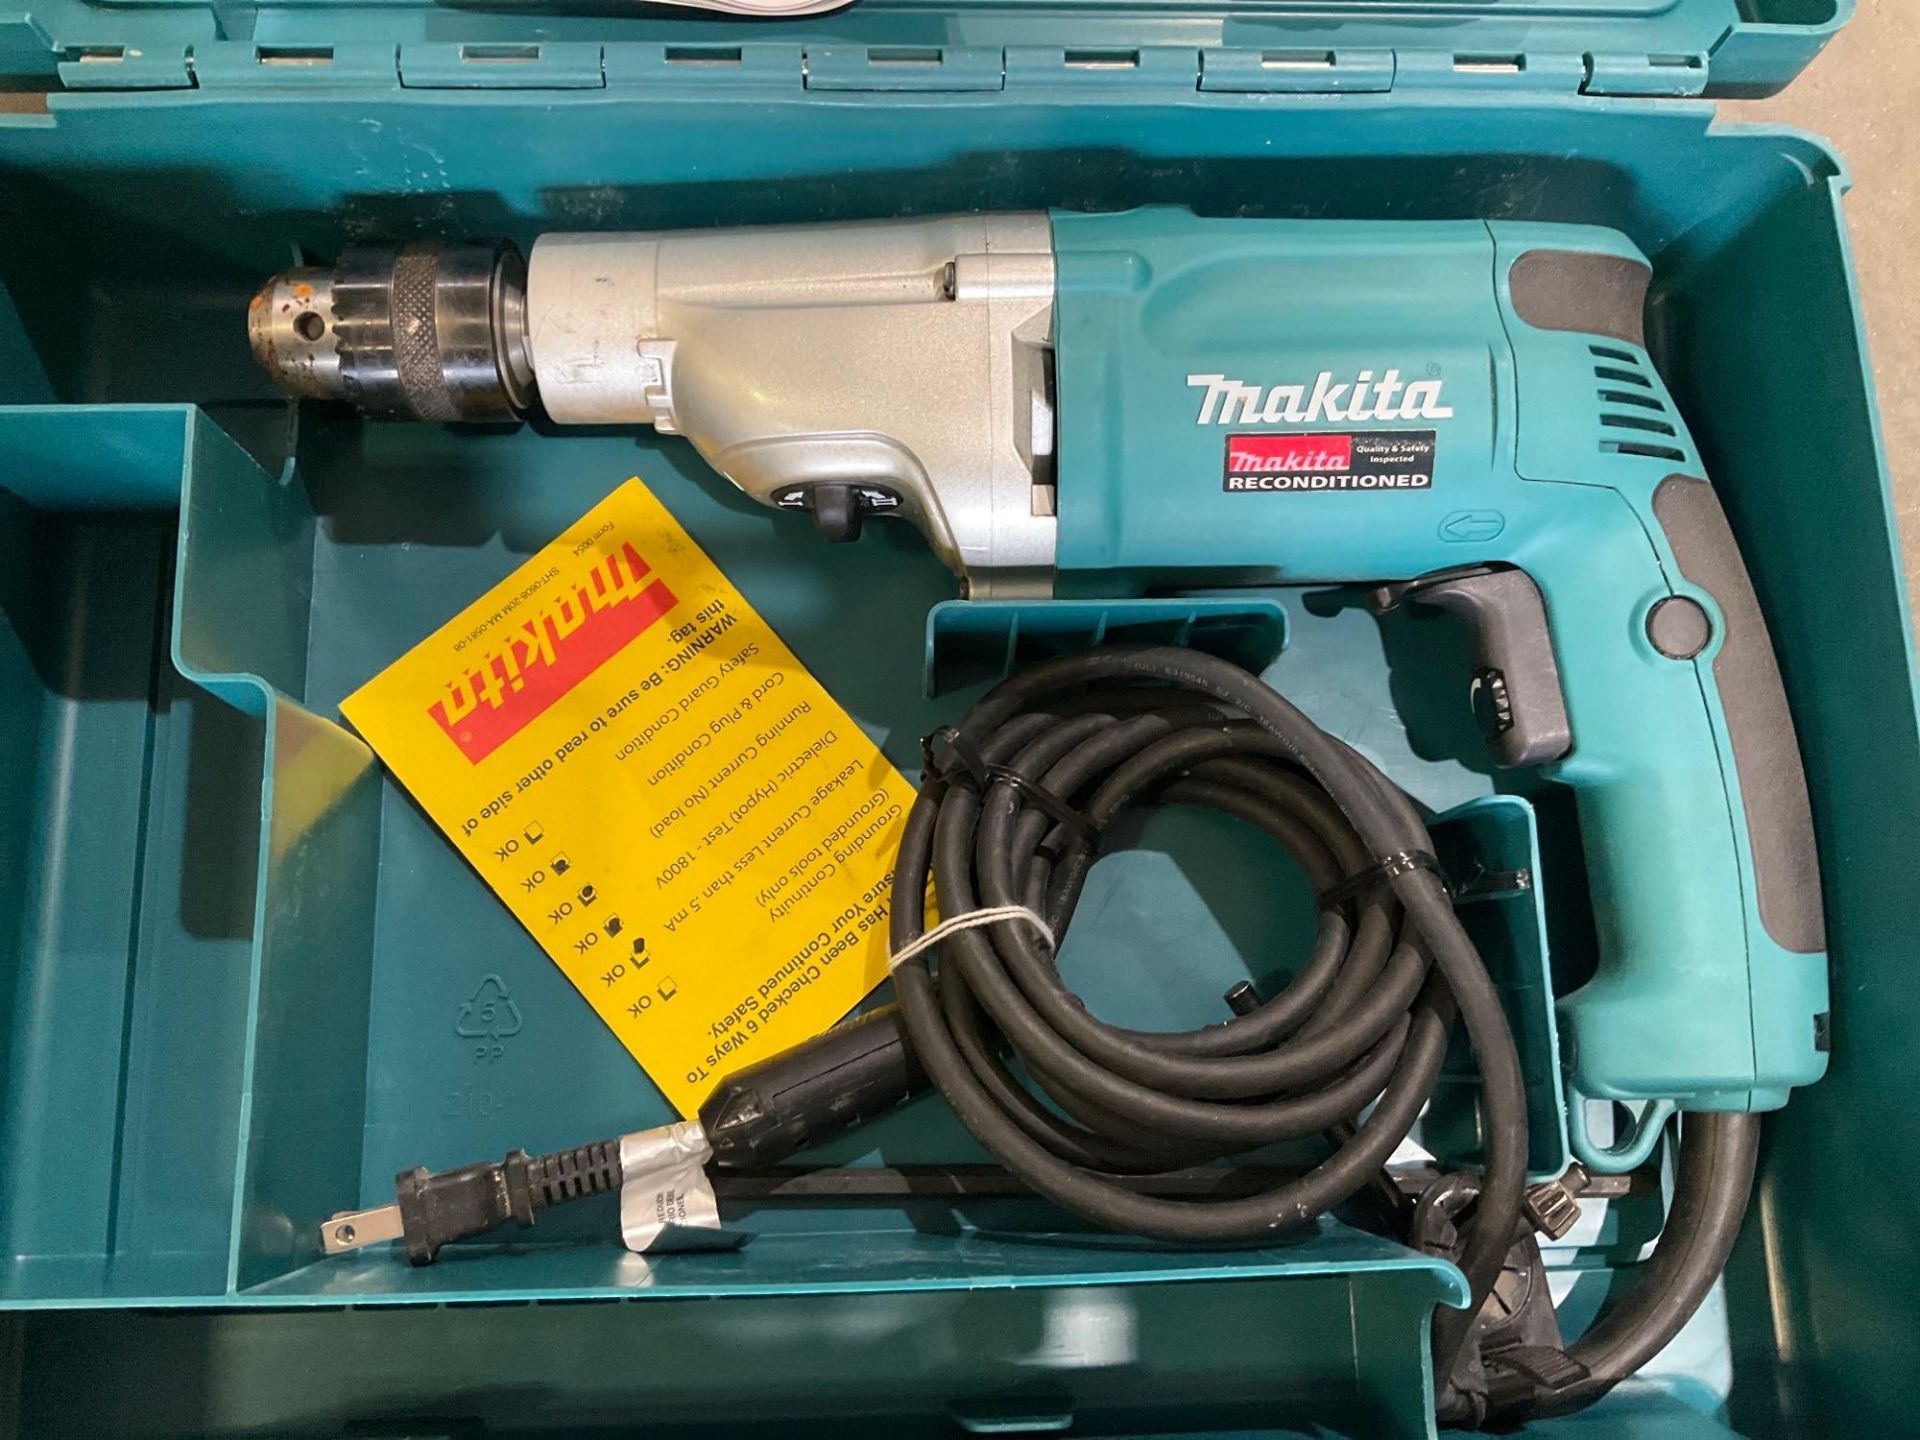 MAKITA 2 SPEED HAMMER DRILL MODEL HP2050WITH CARRYING CASE , RECONDITIONED, APPROX 120VOLTS, APPROX - Image 2 of 6